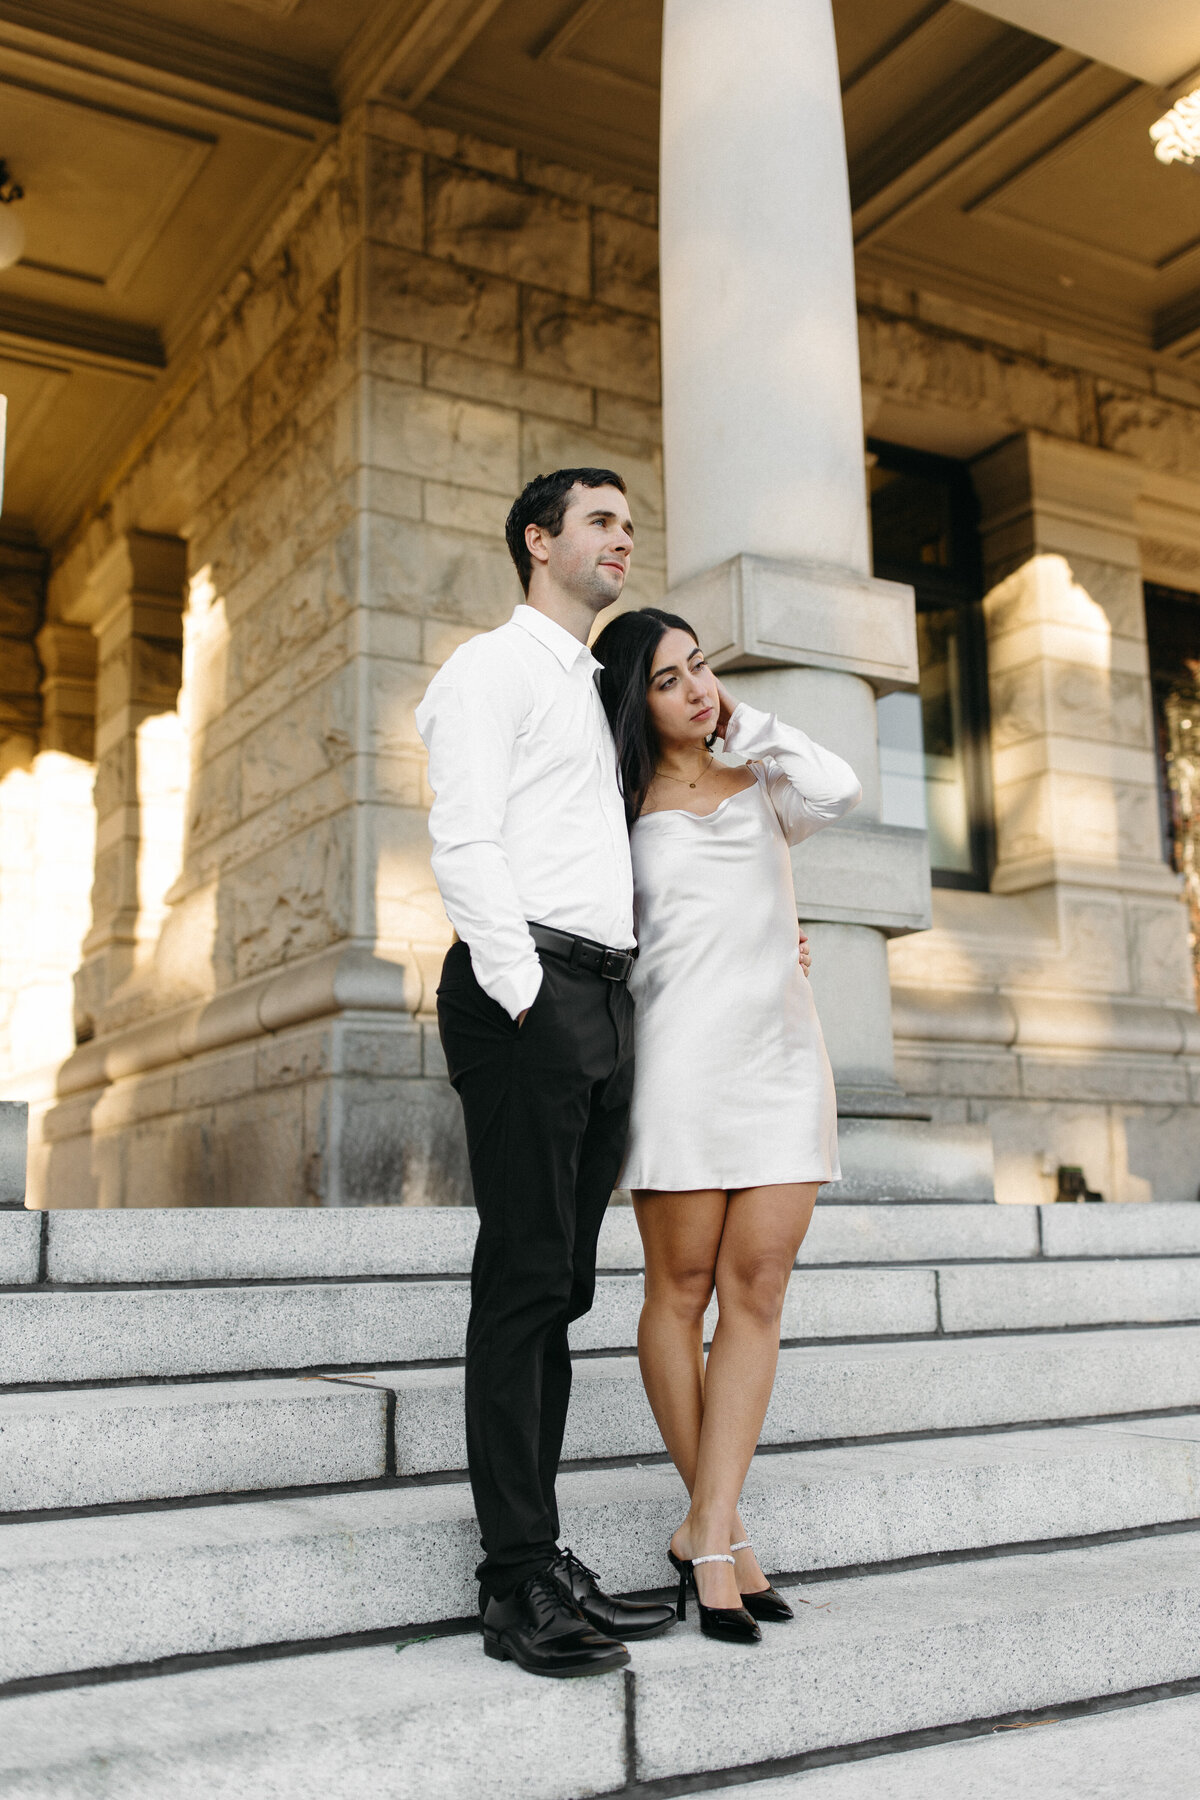 natalina&robbie_victoria_british_columbia_vancouver_island_downtown_rooftop_engagement_session_timeless_classy_elegant_old_money_sunset_stairs_romantic_couples_photos_photography_by_taiya82